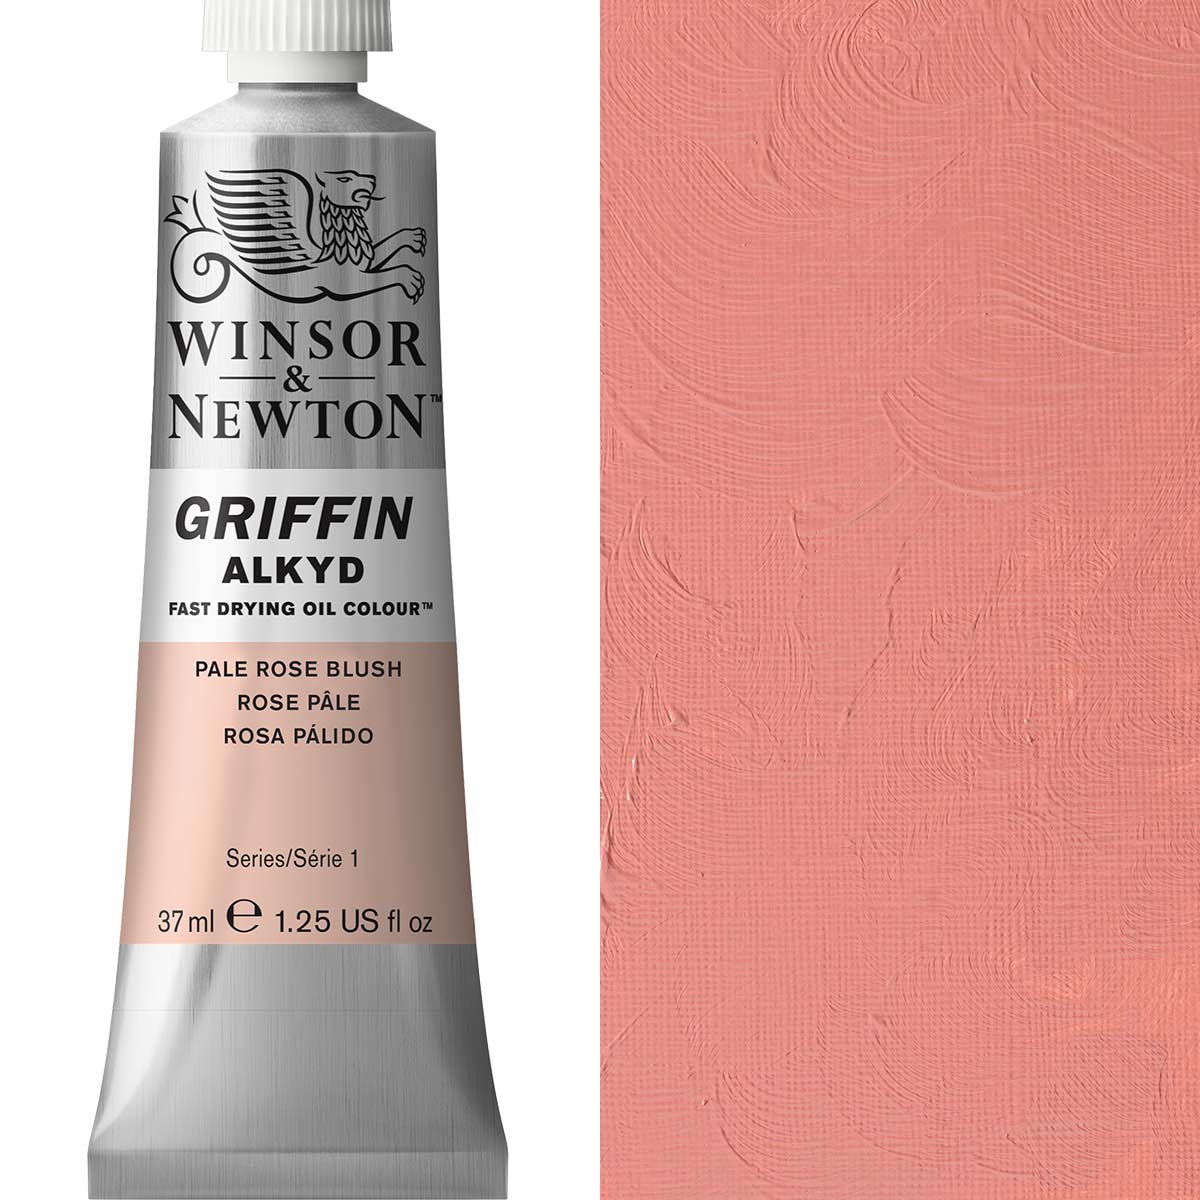 Winsor and Newton - Griffin ALKYD Oil Colour - 37ml - Pale Rose Blush